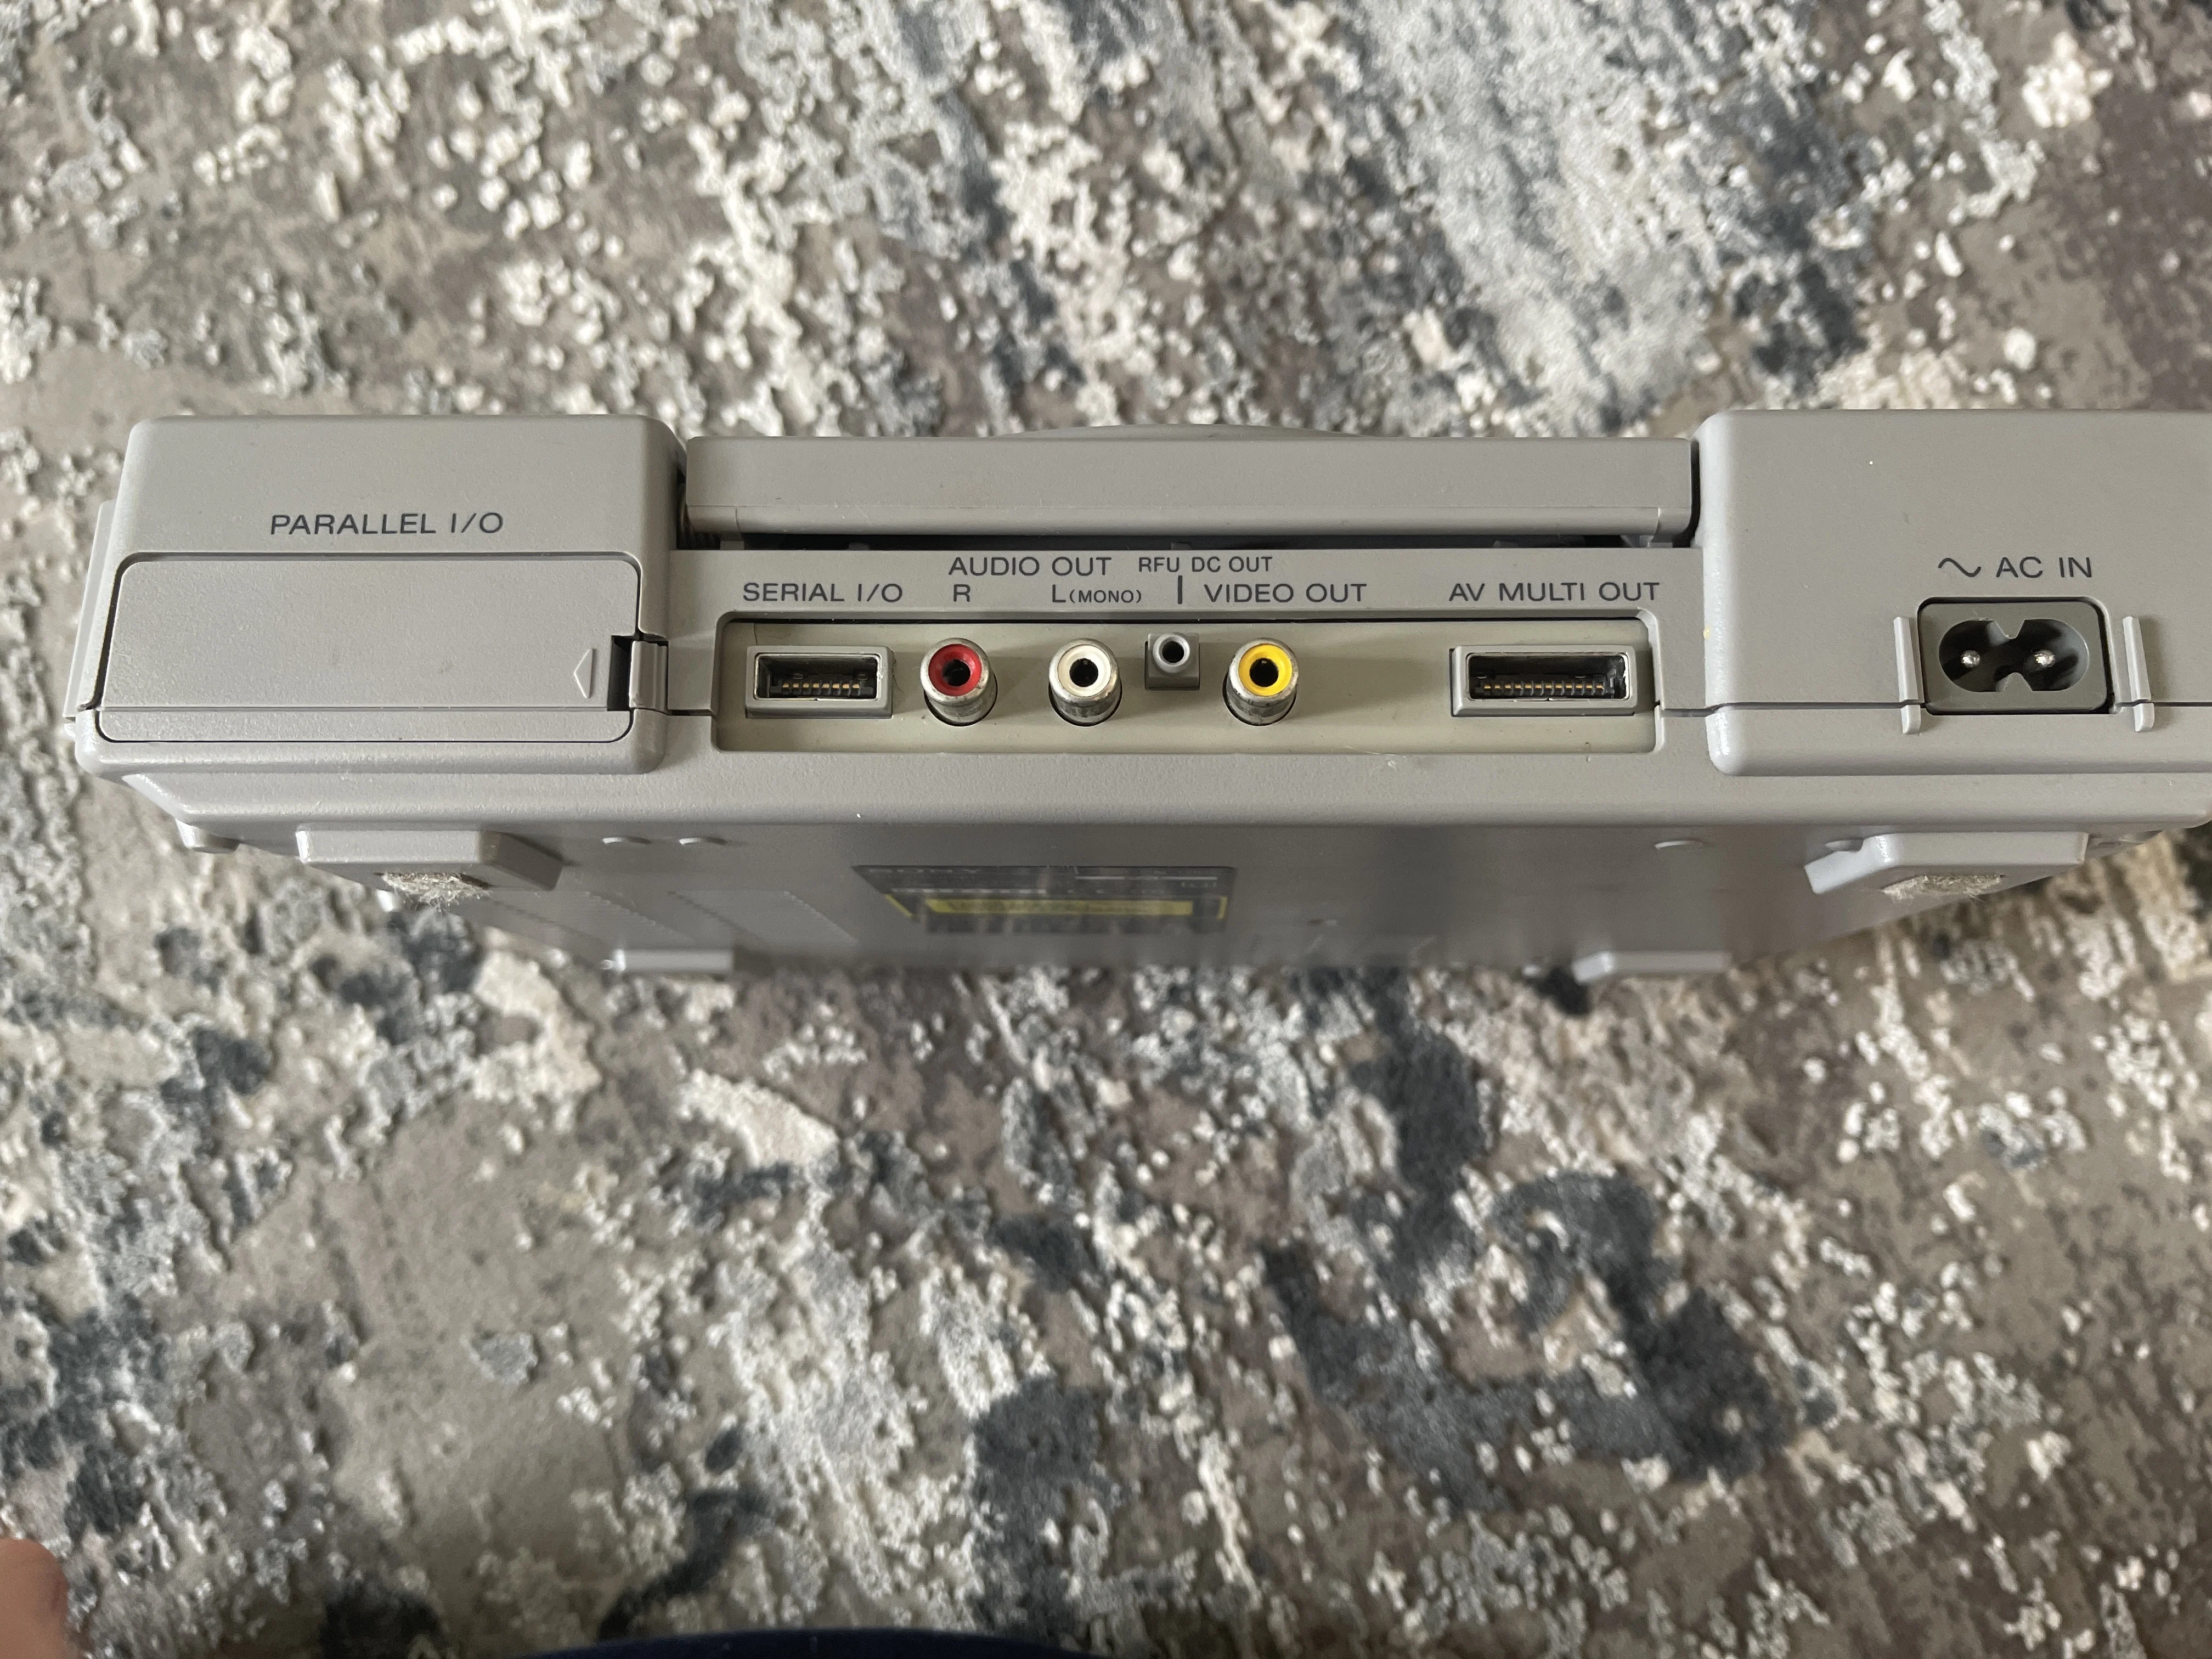  Sony PlayStation SCPH-1002 Model